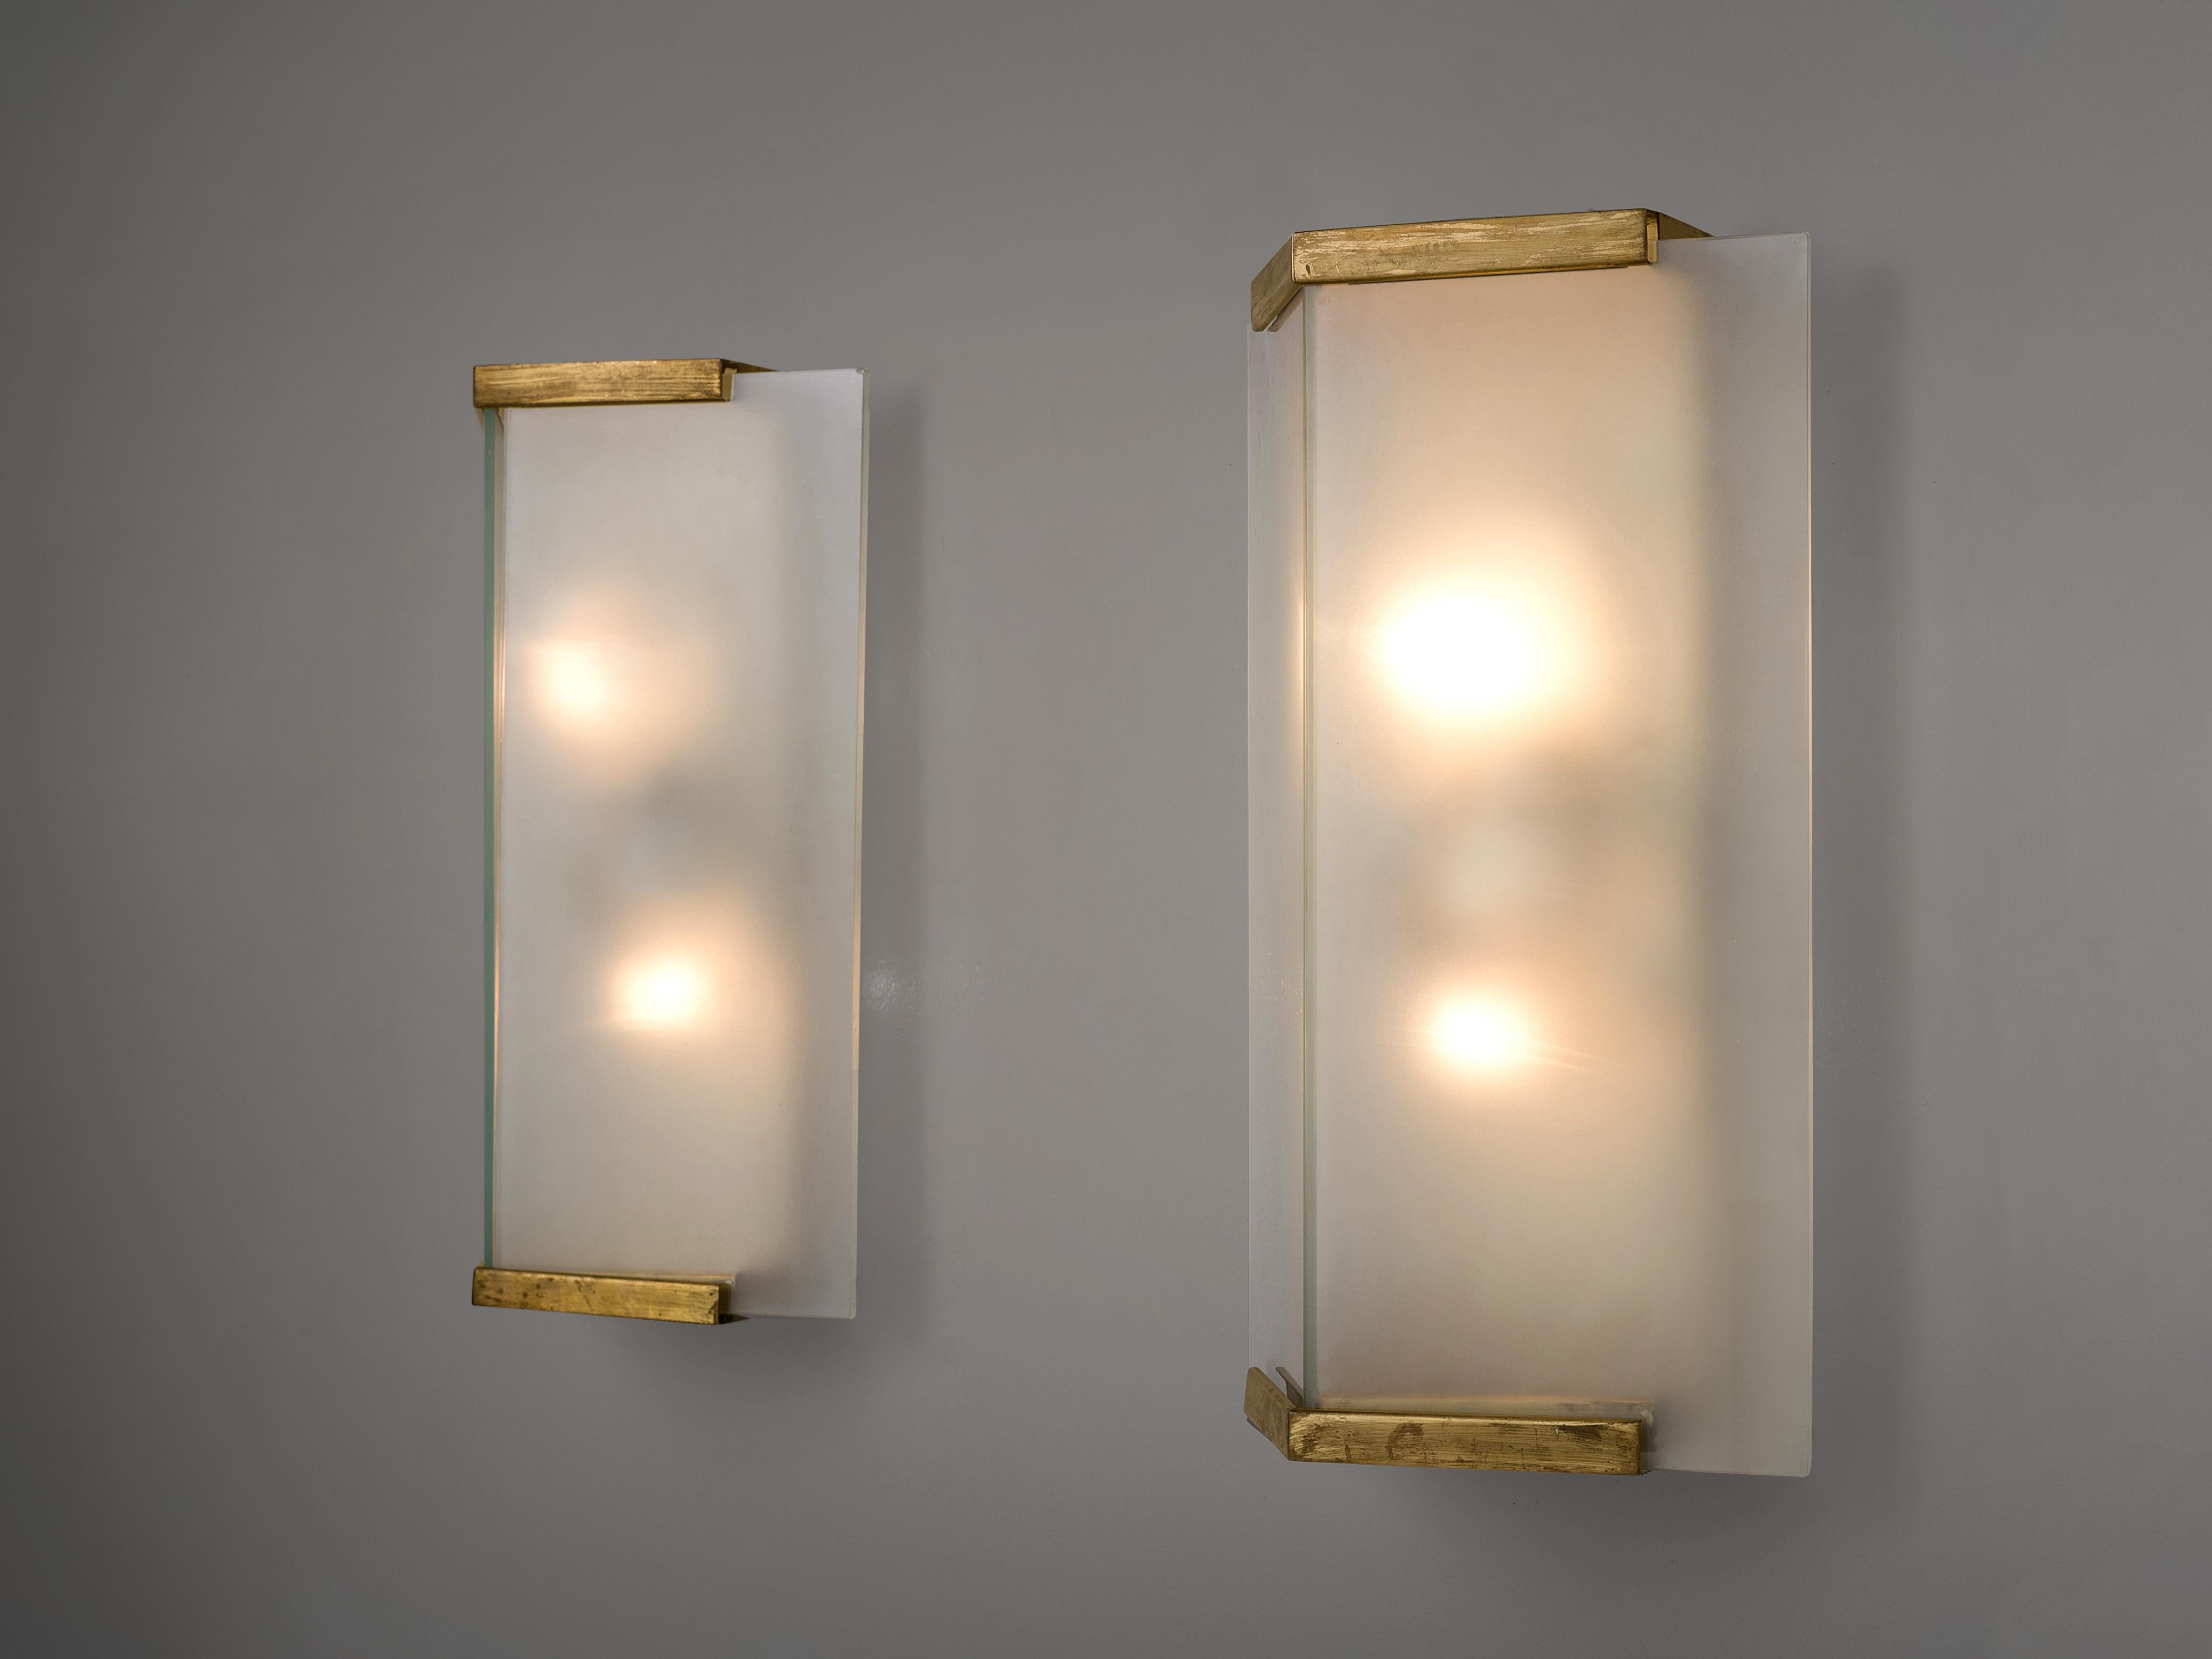 Pair of wall light, brass, frosted glass, Europe, 1930s.

These simplistic geometric sturdy wall lights give off a warm light partition thanks to the thick, high-quality glass. The lights feature a double, symmetrical lay-out with triangle glass